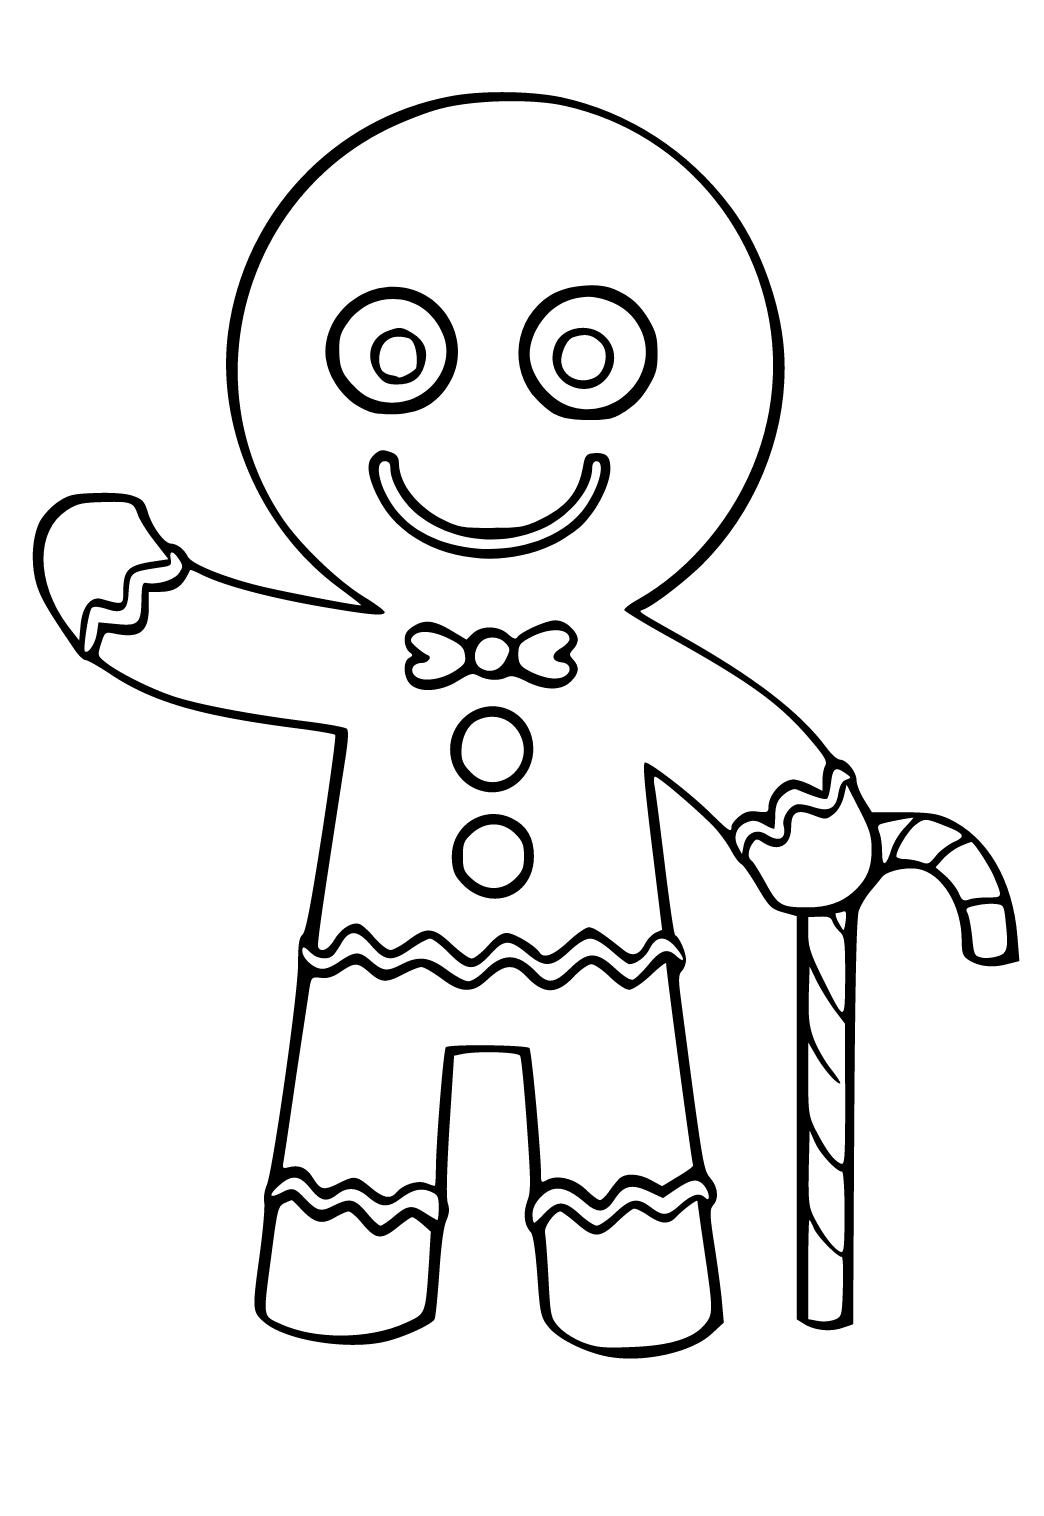 Free printable gingerbread man old man coloring page for adults and kids